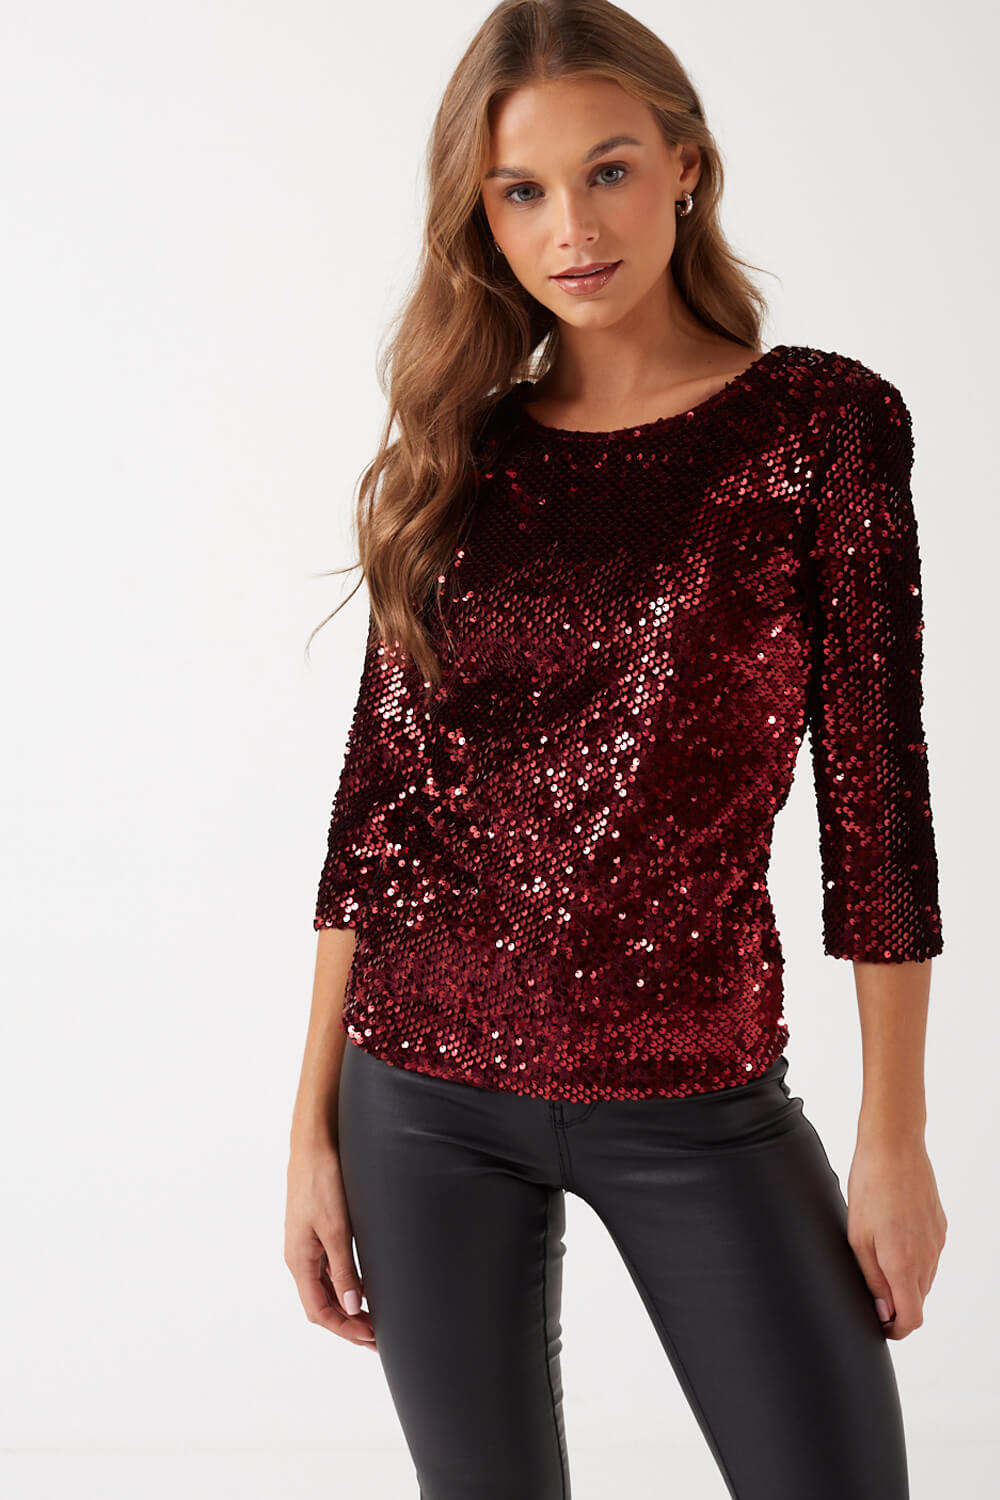 Marc Angelo Patsy Sequin Top in Wine | iCLOTHING - iCLOTHING